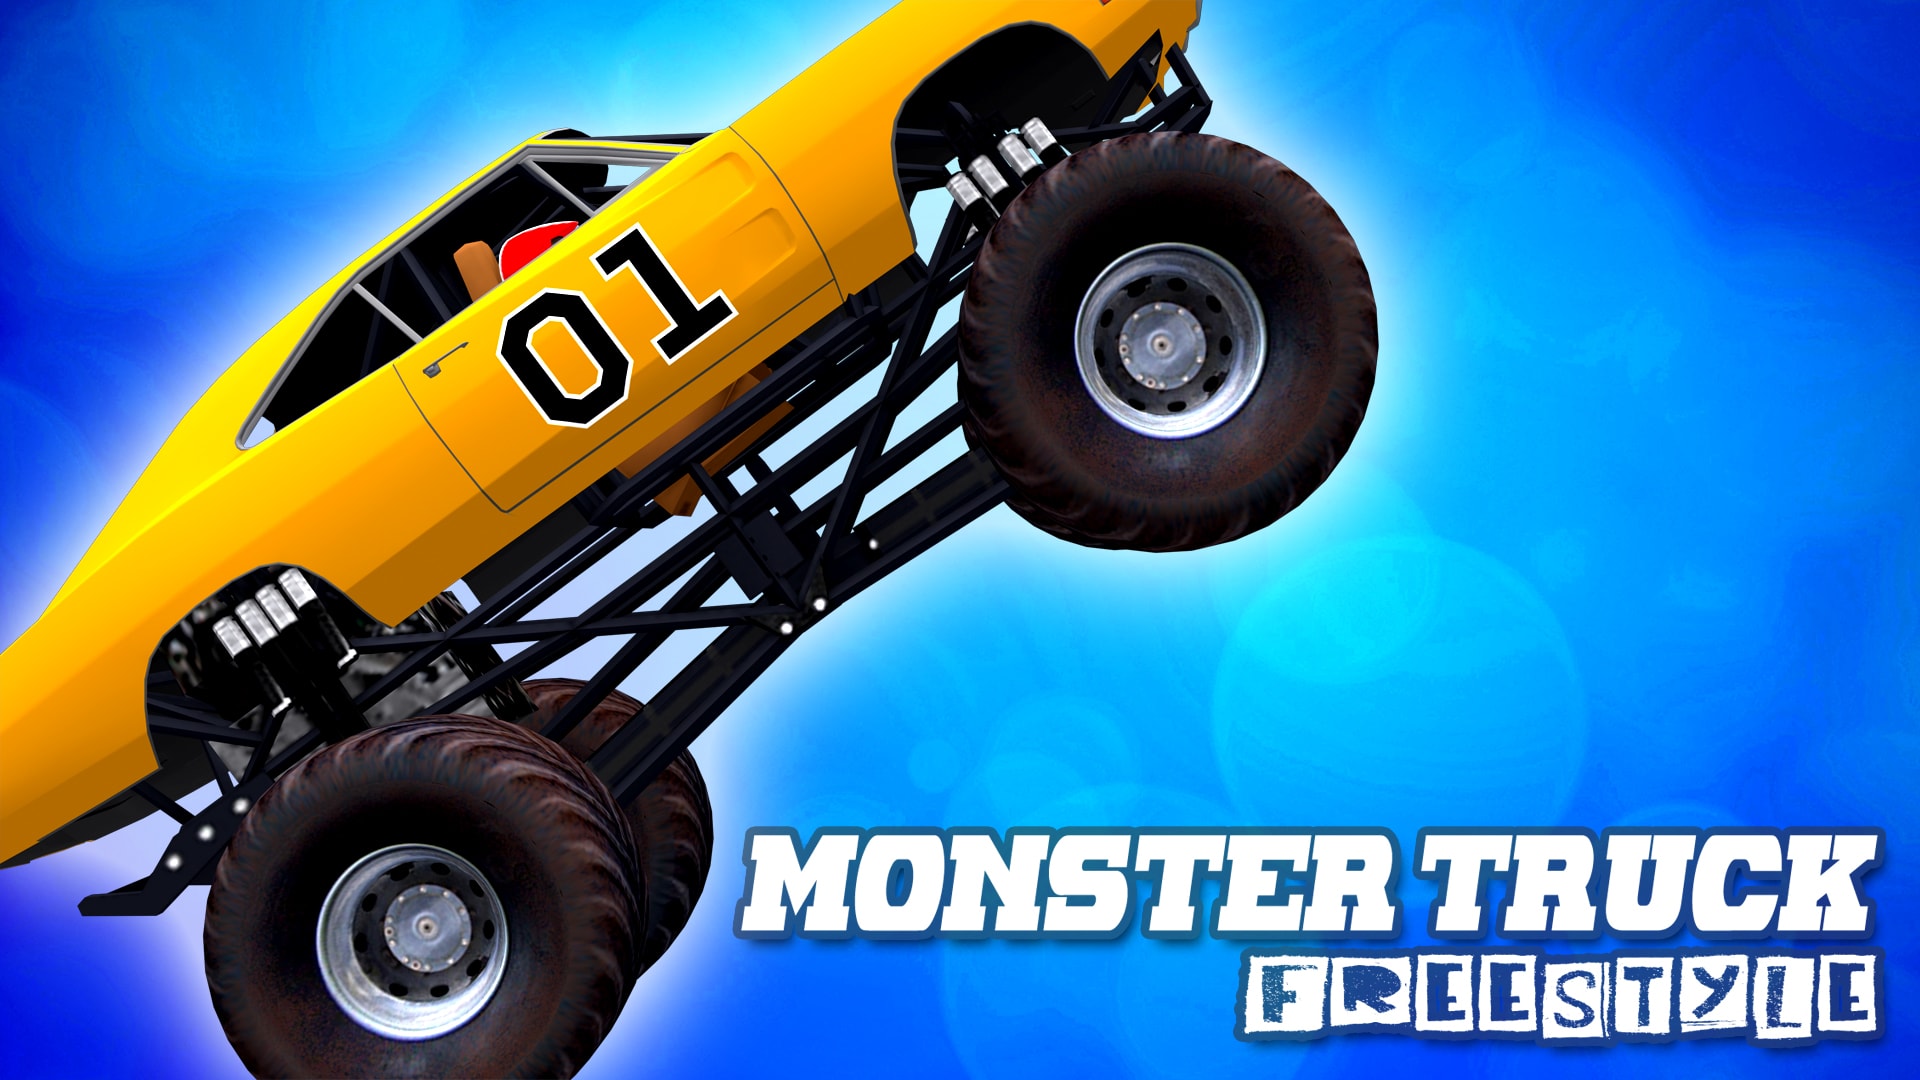 Monster Truck Freestyle 1